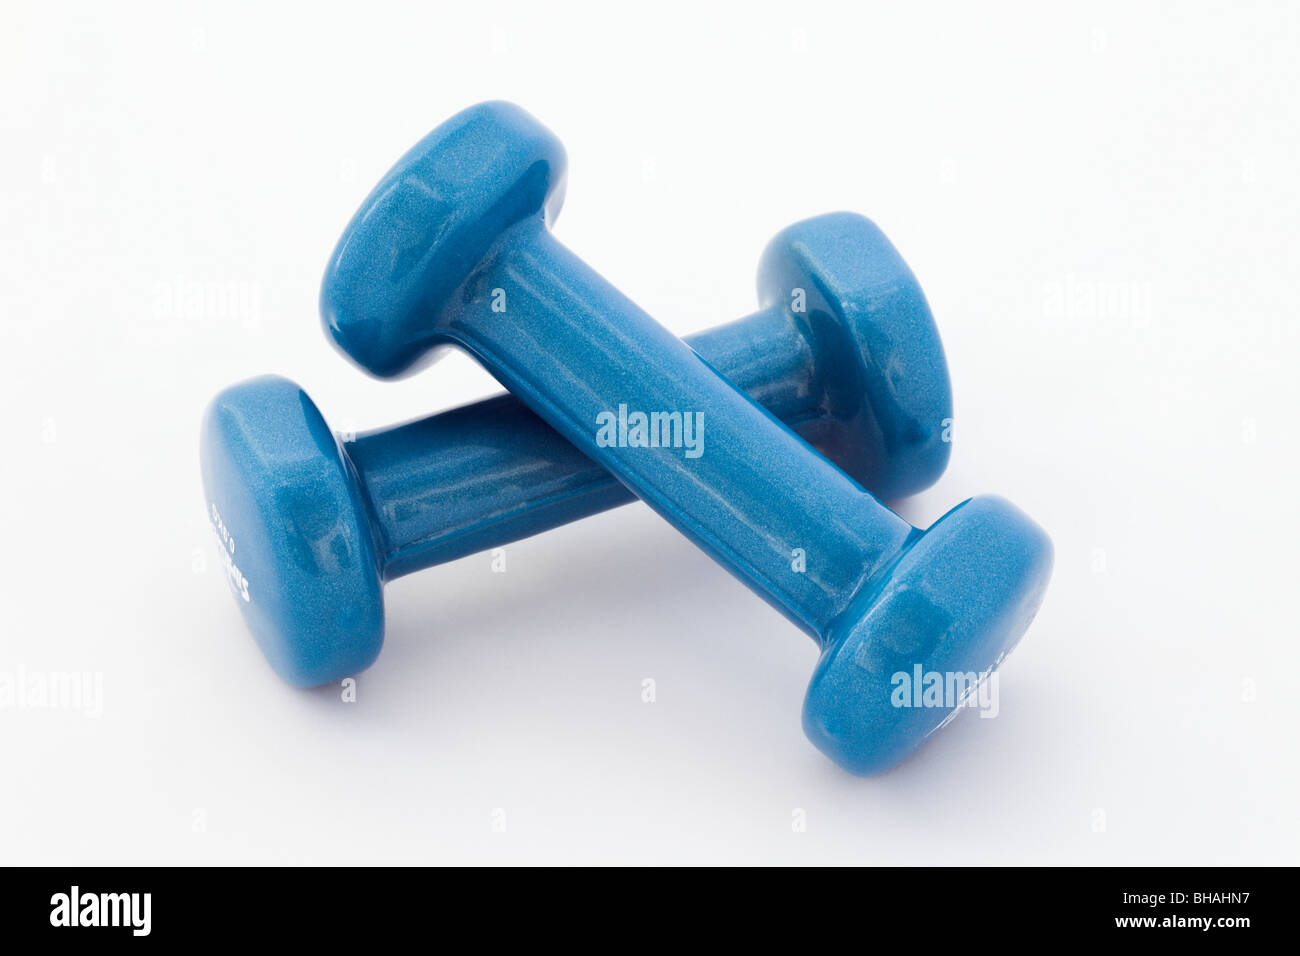 Dumbbell Cutout High Resolution Stock Photography and Images - Alamy